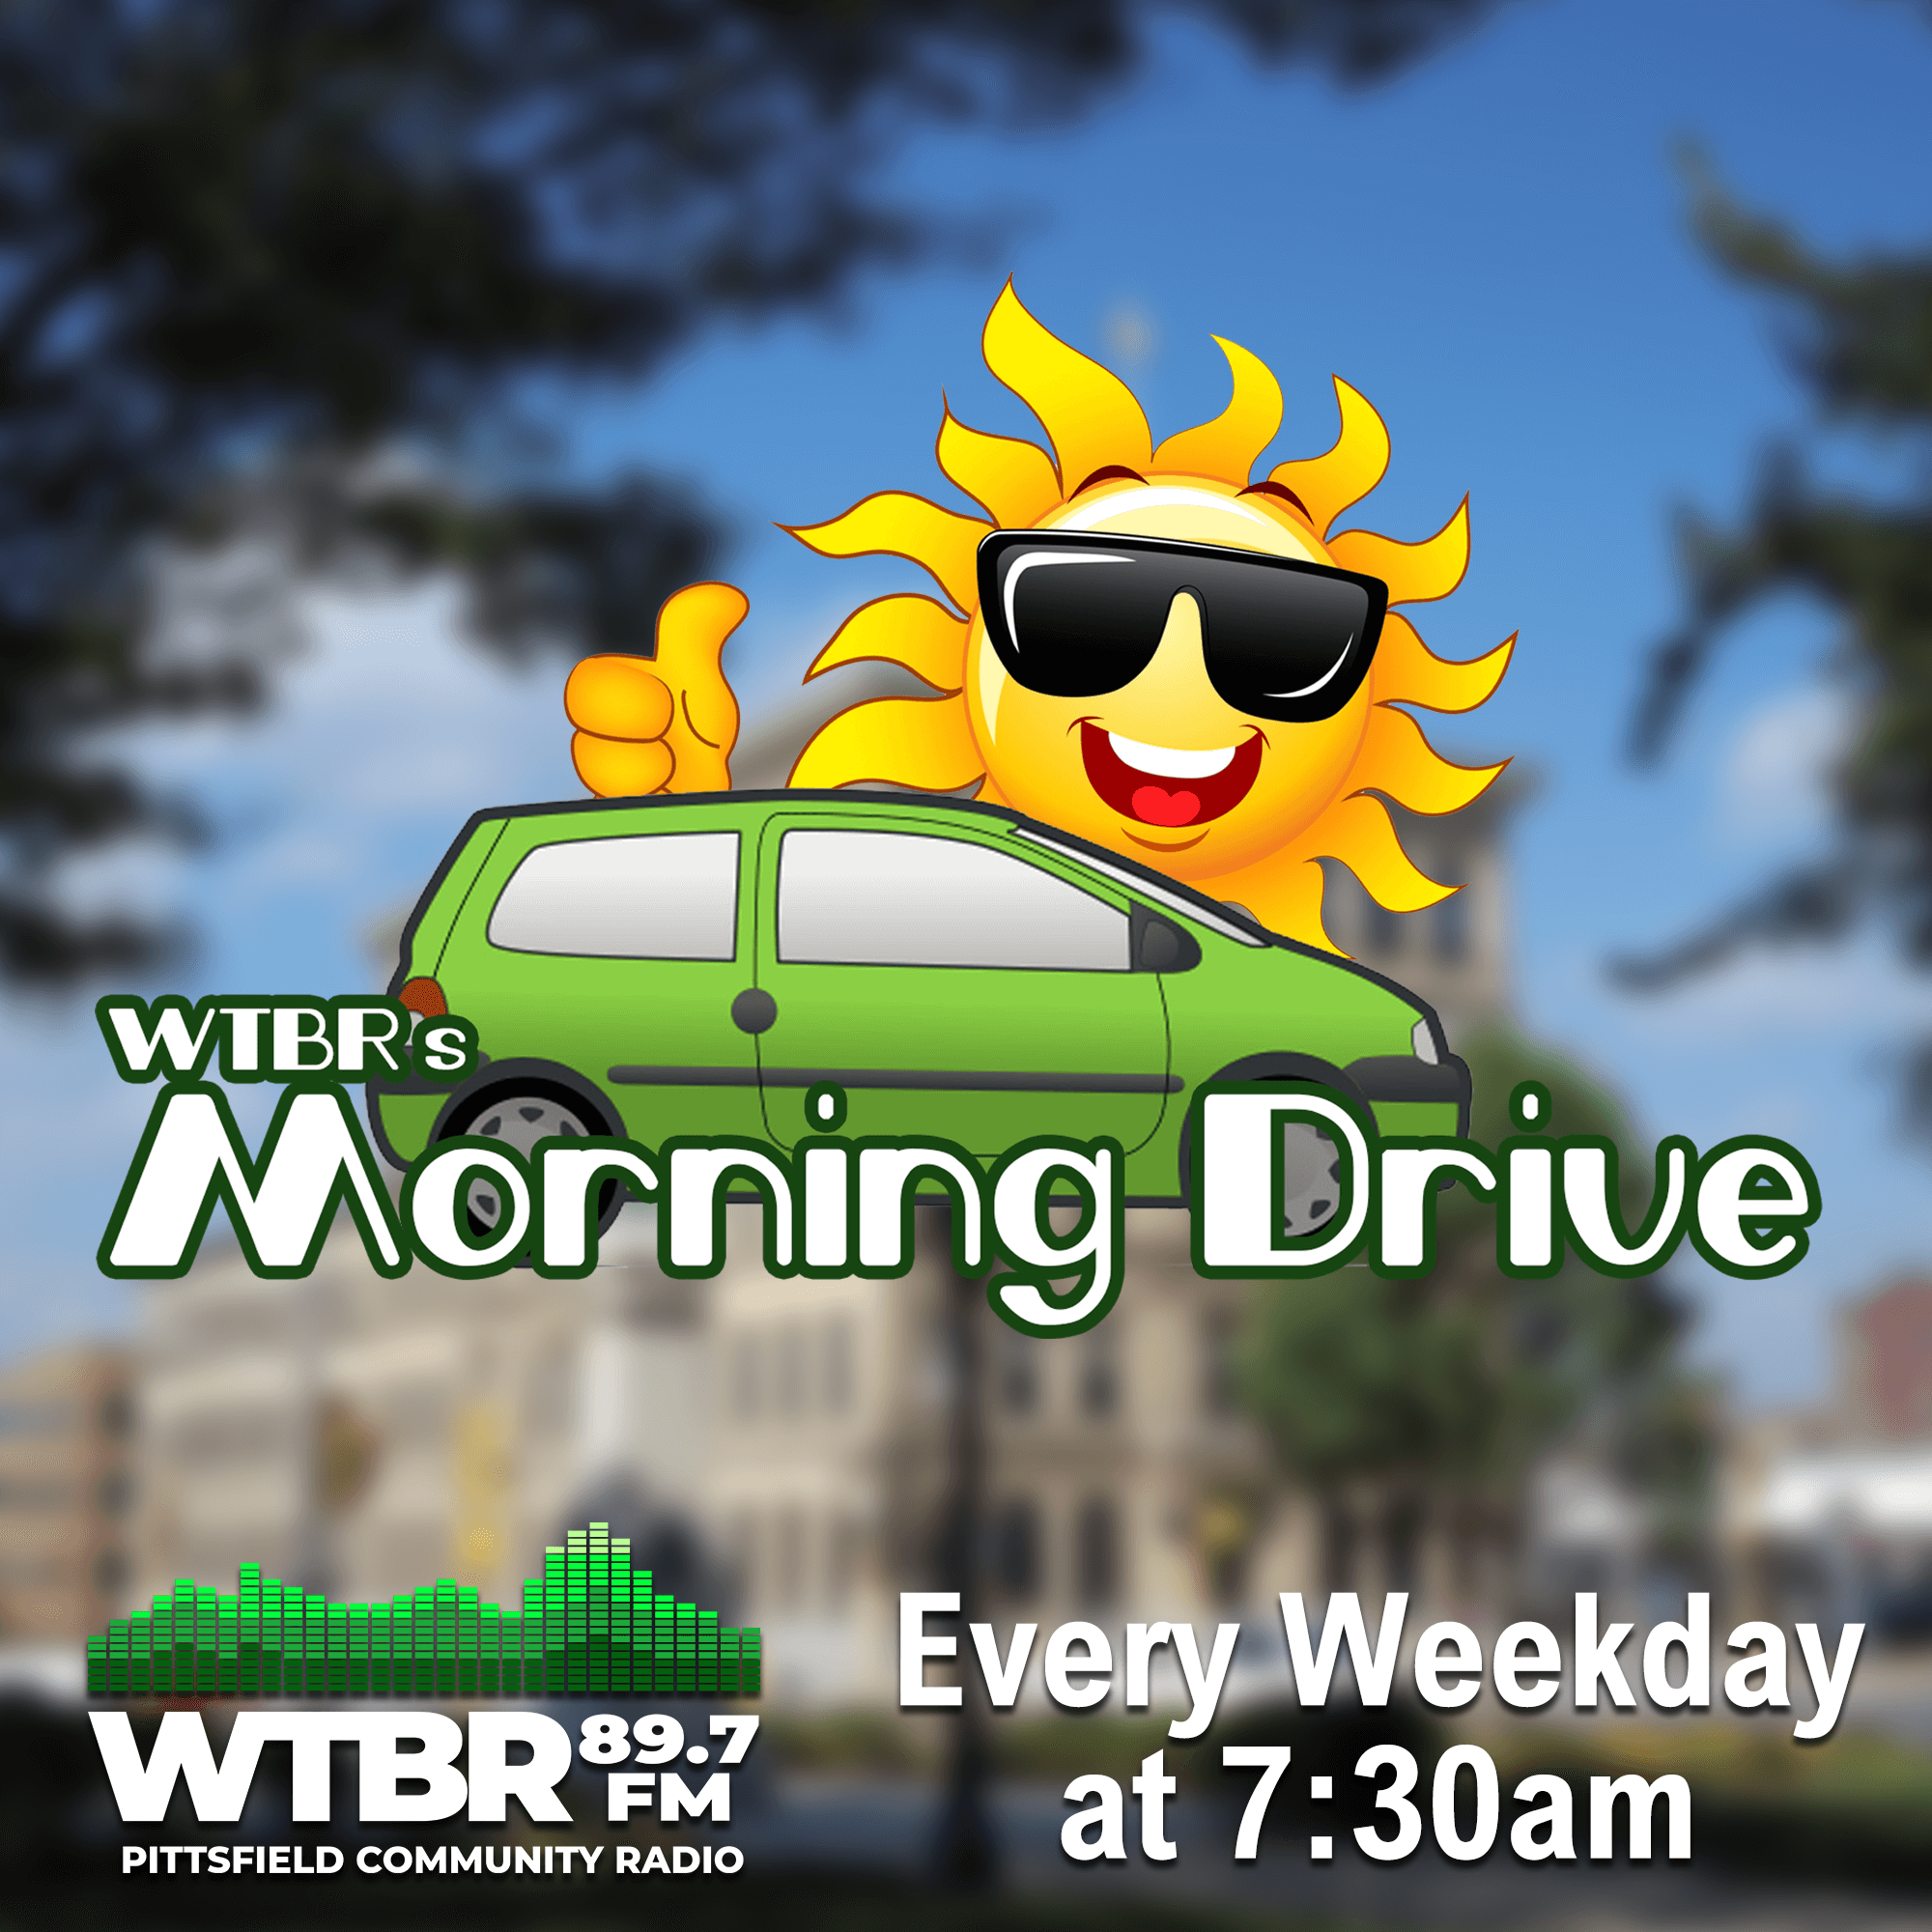 WTBR's Morning Drive